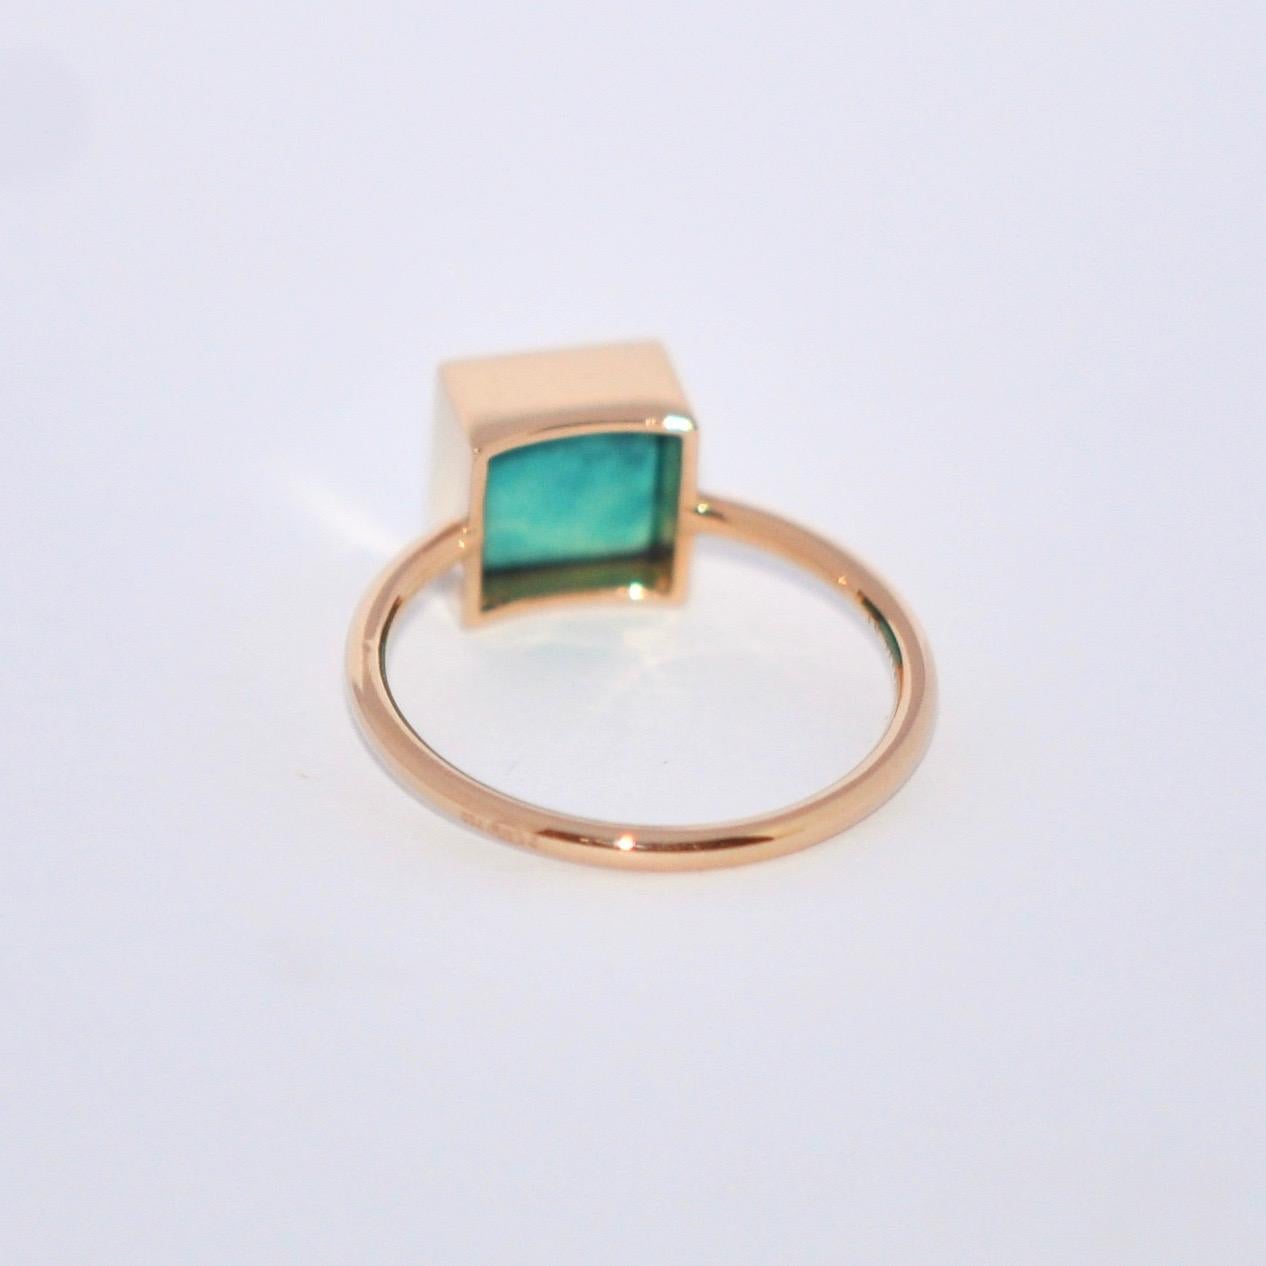 Discover this Square Turquoise and Rose Gold 18 Karat Fashion Ring.
Square Turquoise
Rose Gold 18 Karat
French Size 52
US Size 6